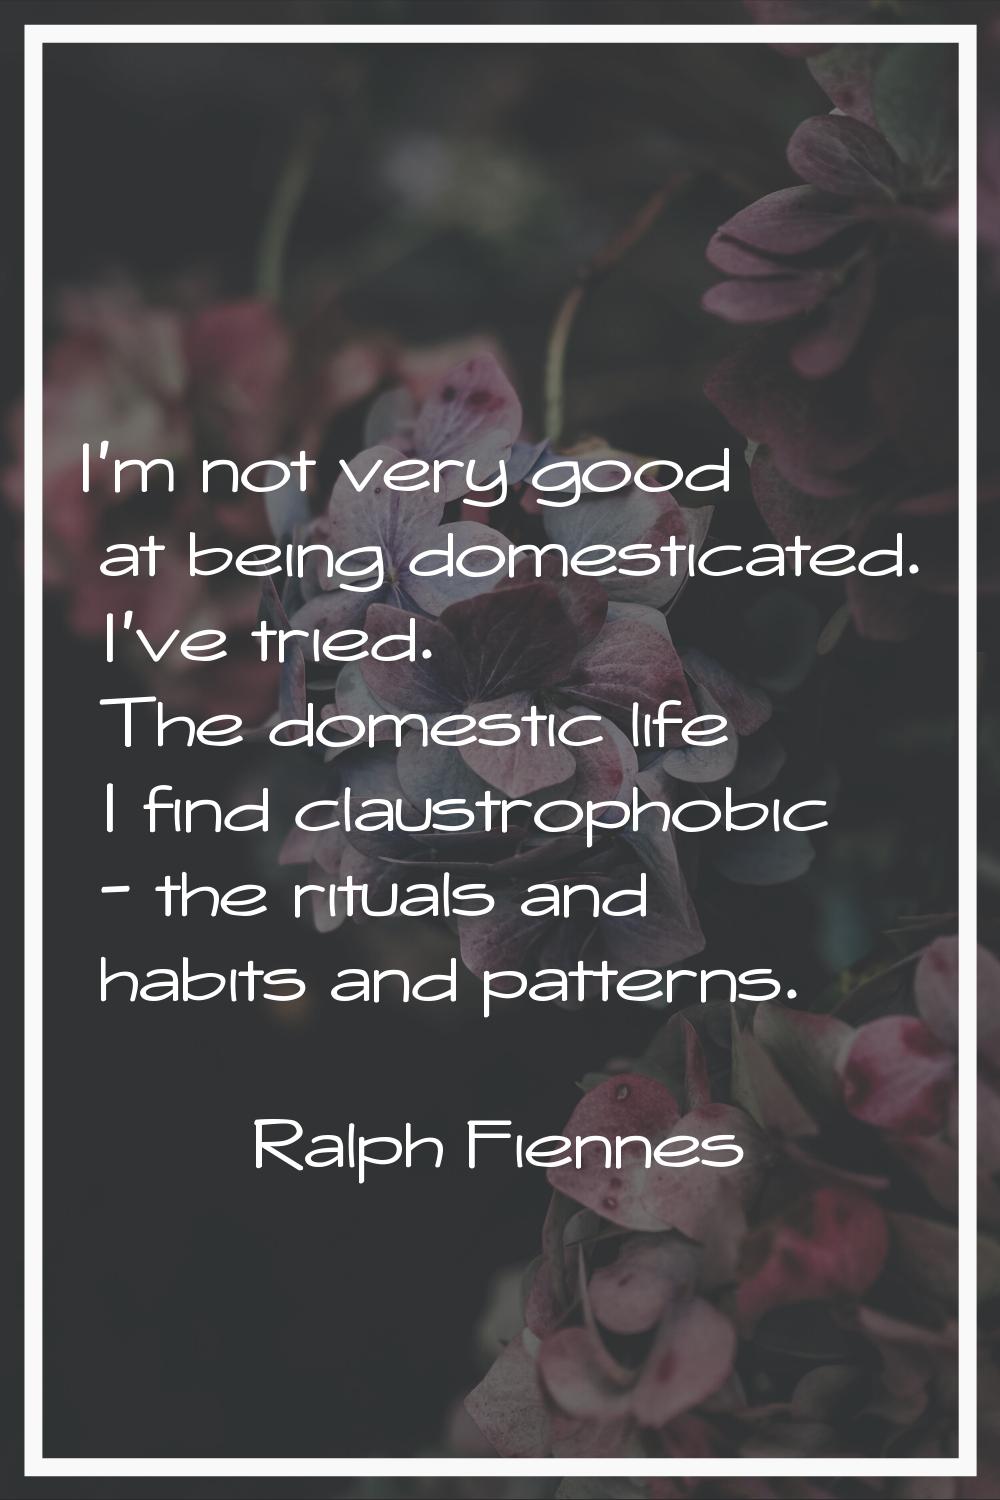 I'm not very good at being domesticated. I've tried. The domestic life I find claustrophobic - the 